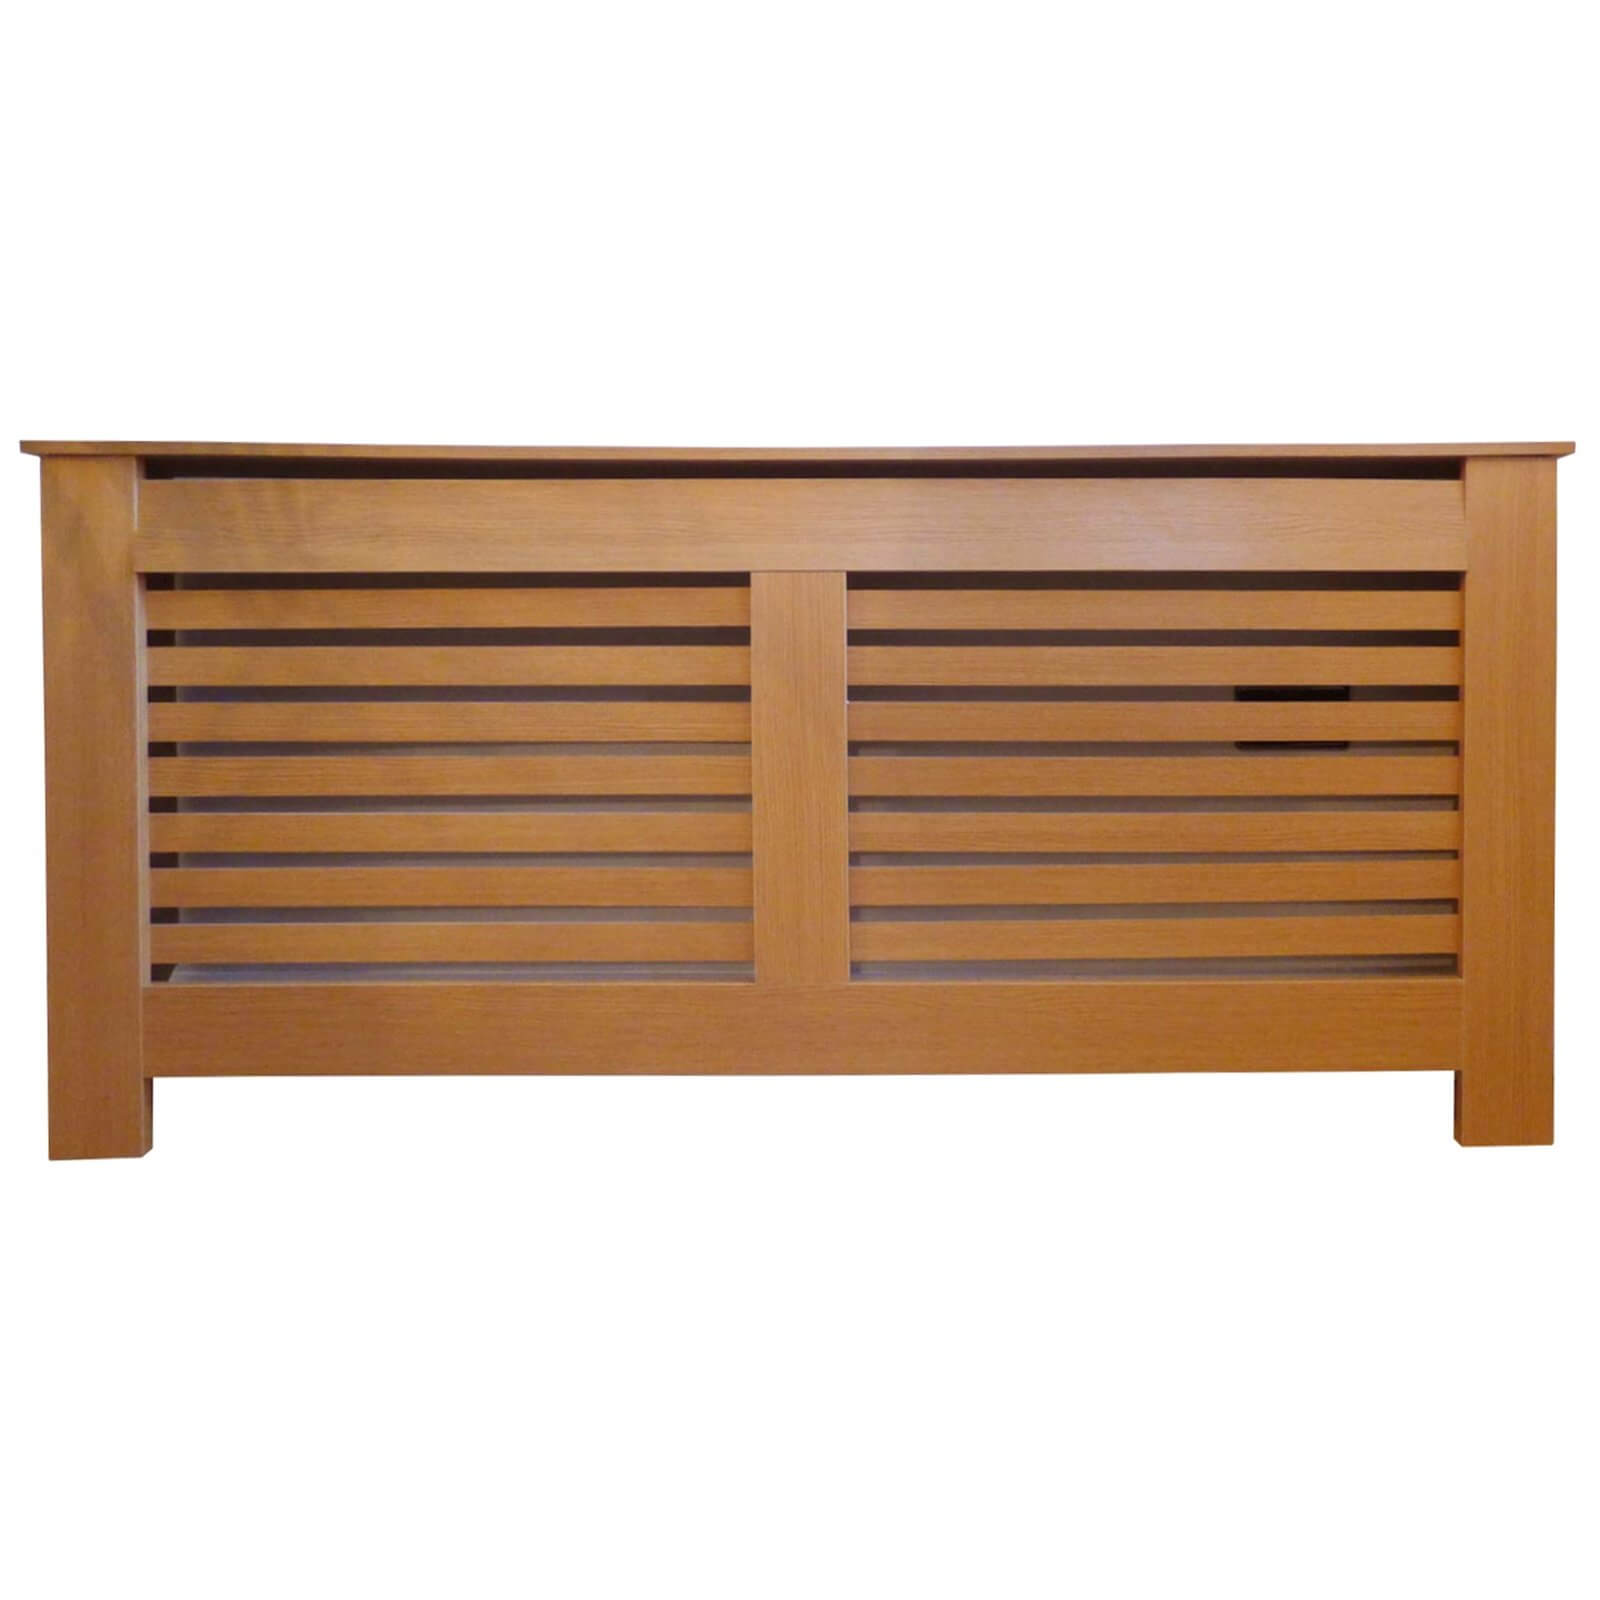 Radiator Cover with Horizontal Slatted Design in Oak - Extra Large